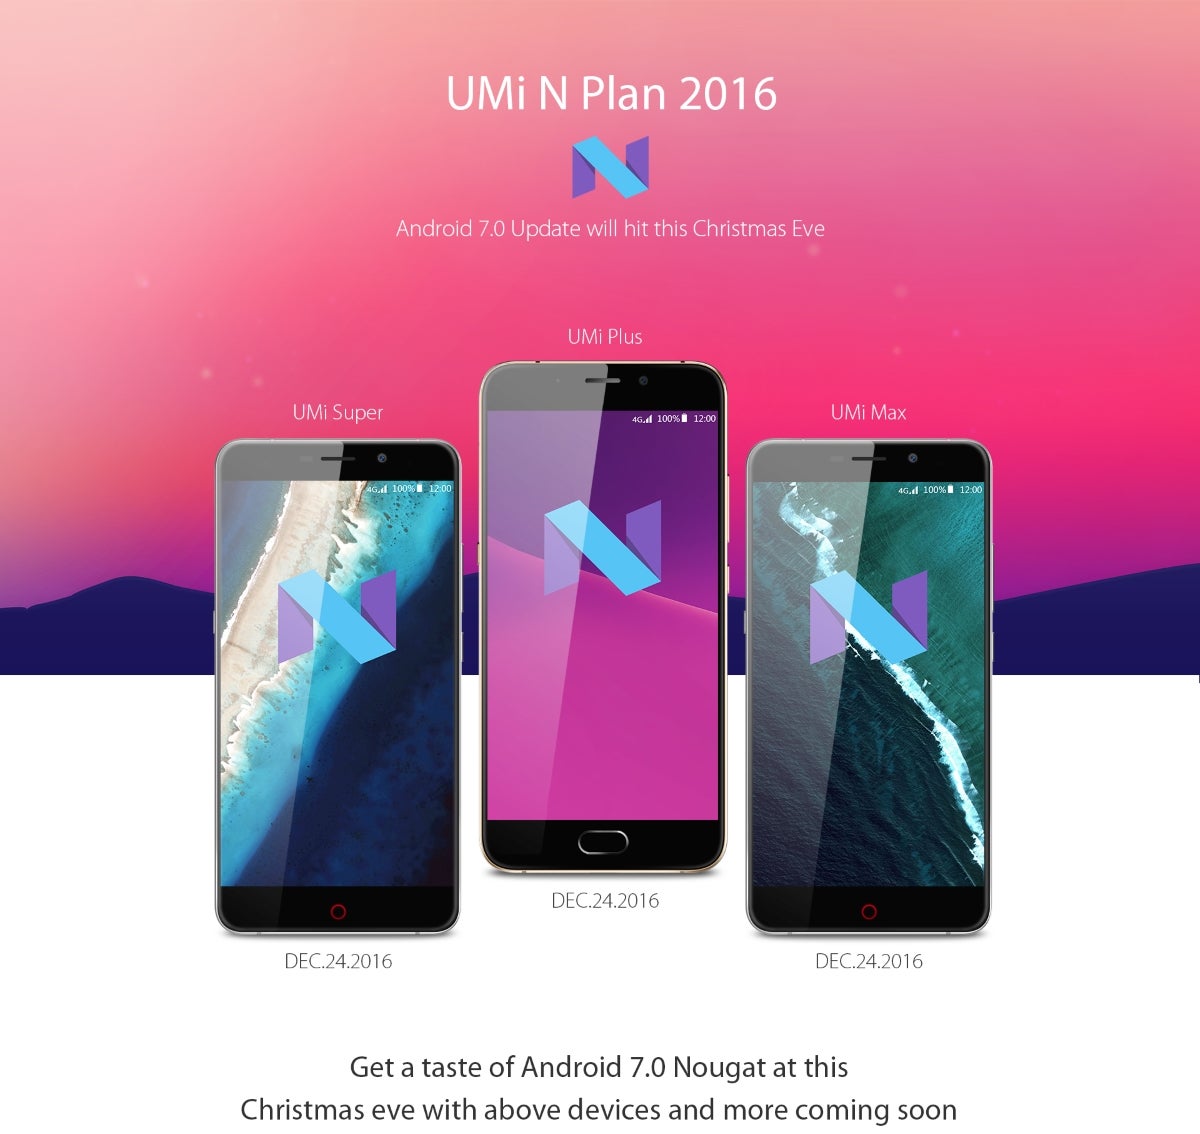 UMi will release an update to Android 7.0 Nougat before the end of the year - UMi Plus is a smartphone ambitious to deliver compelling photography and 2-day battery life